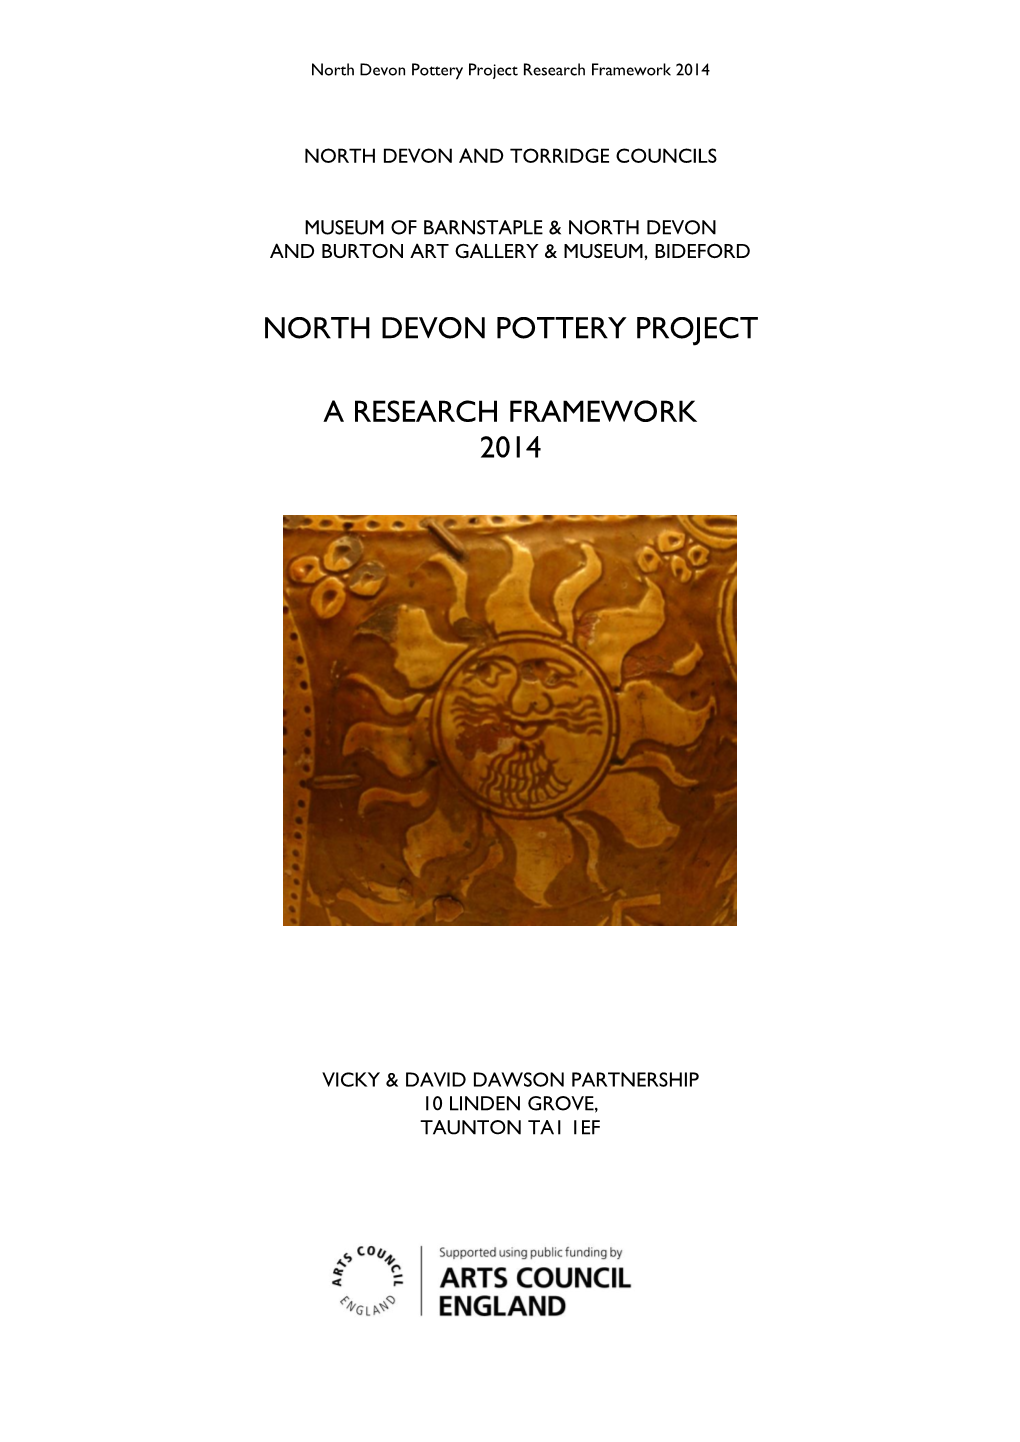 North Devon Pottery Project a Research Framework 2014